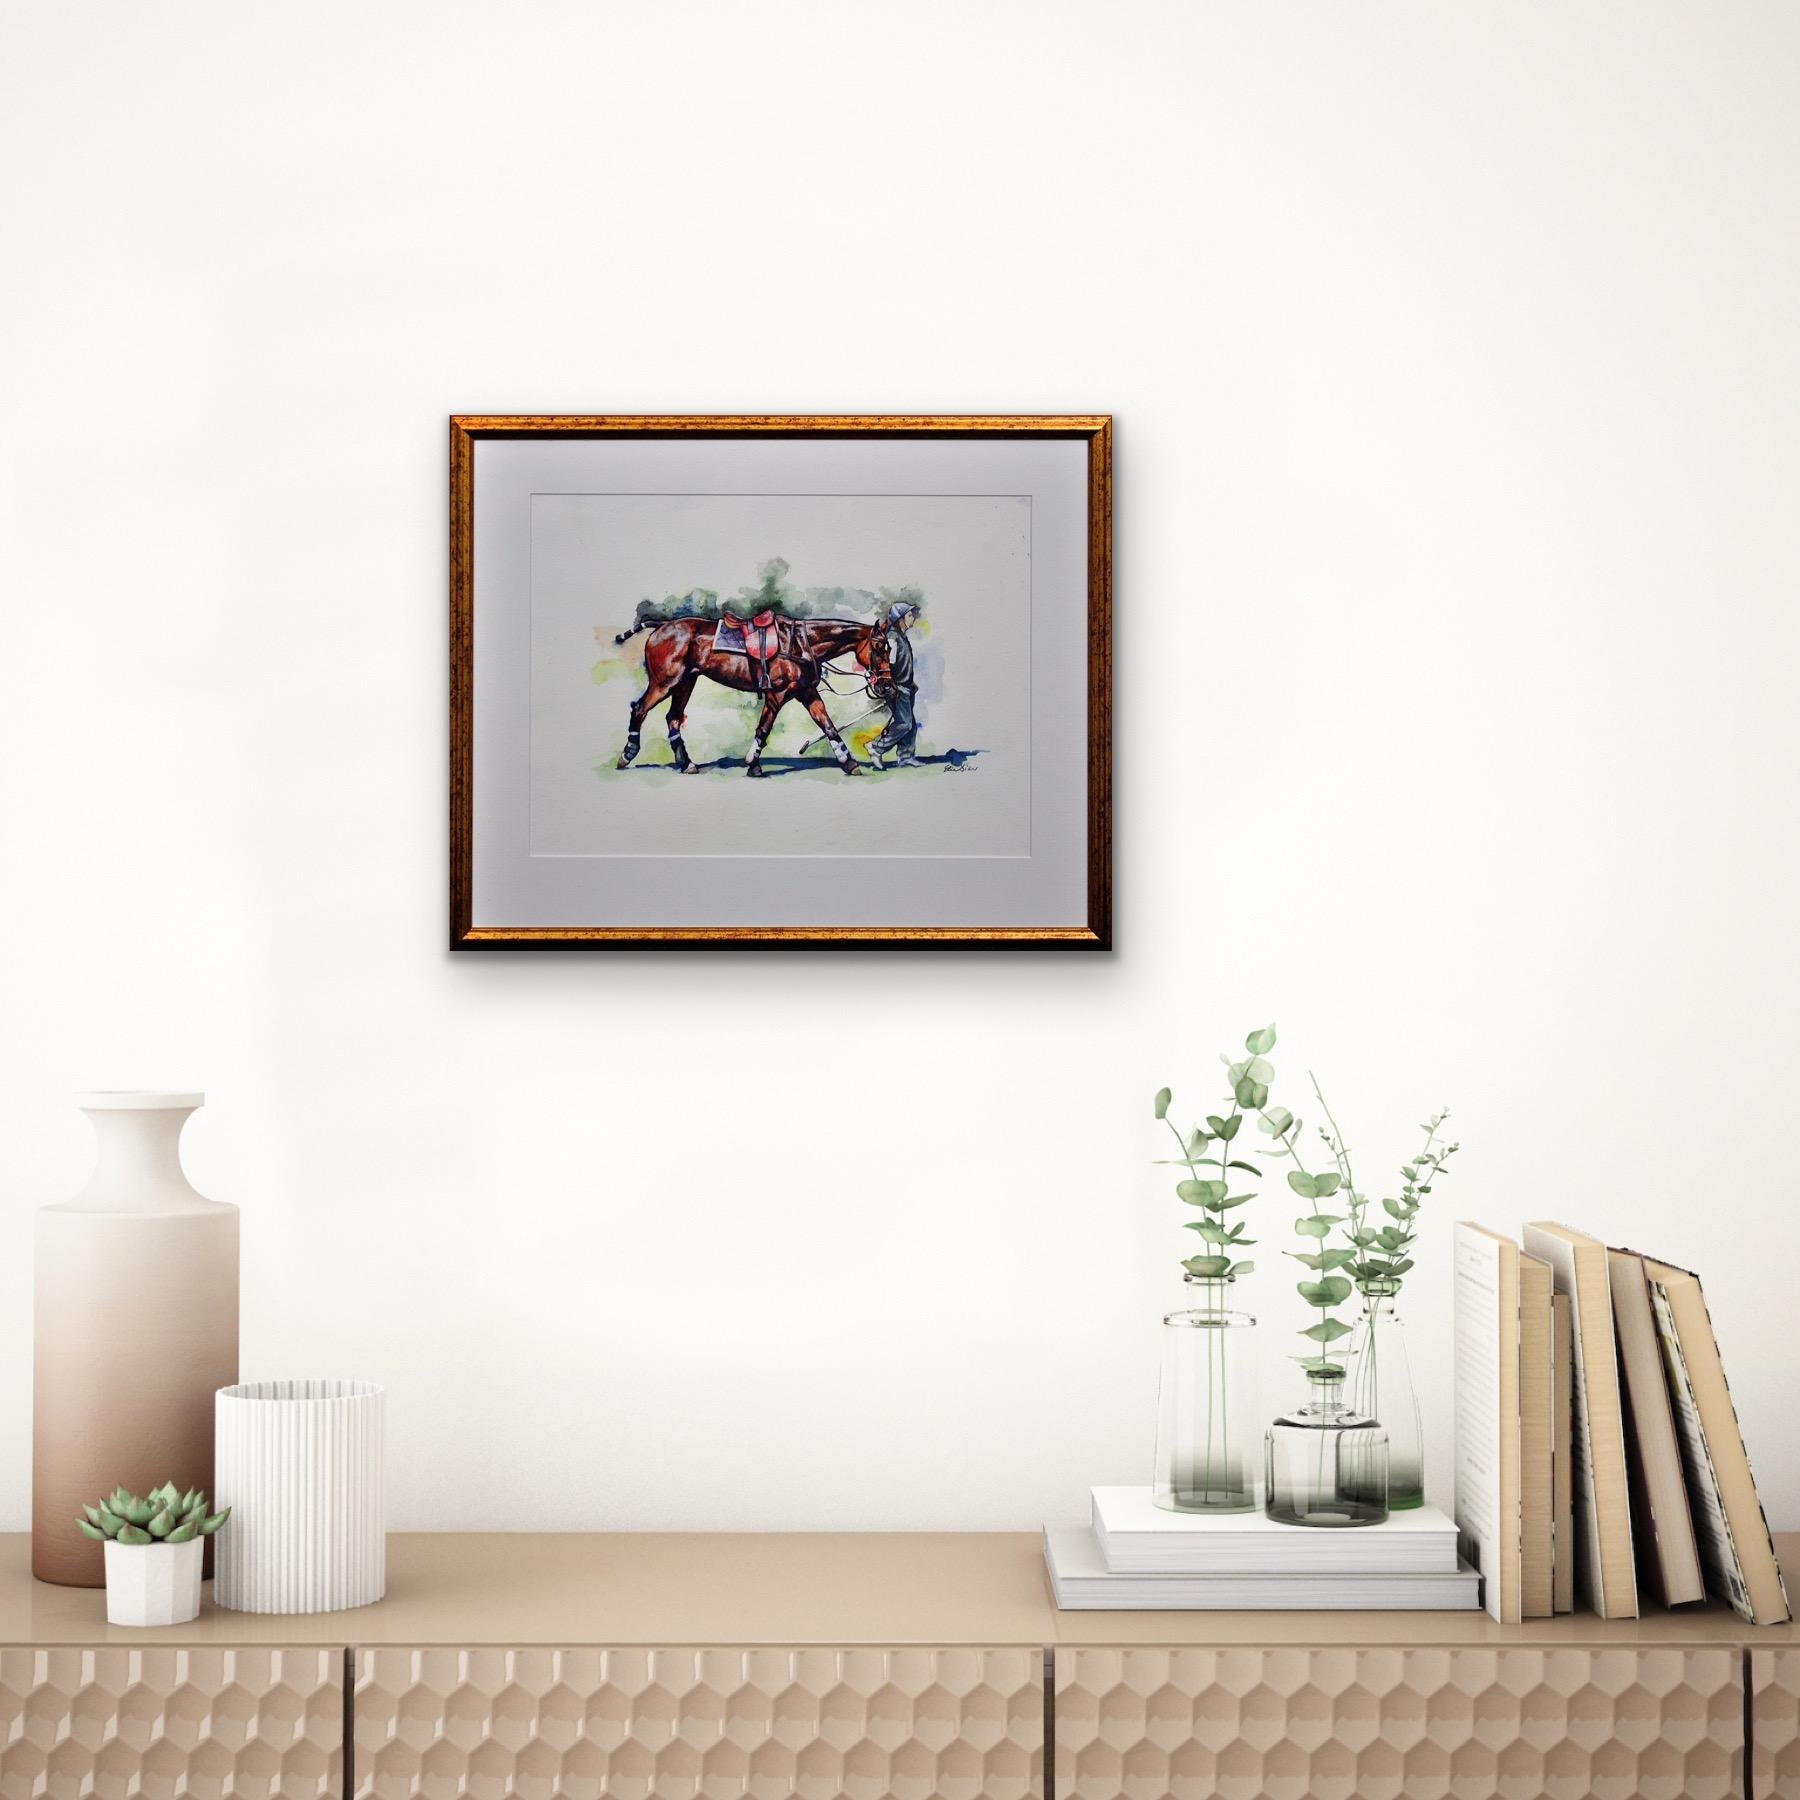 Polo Match, Cirencester, Player Leading Pony. Cotswolds. Framed Watercolor. For Sale 6